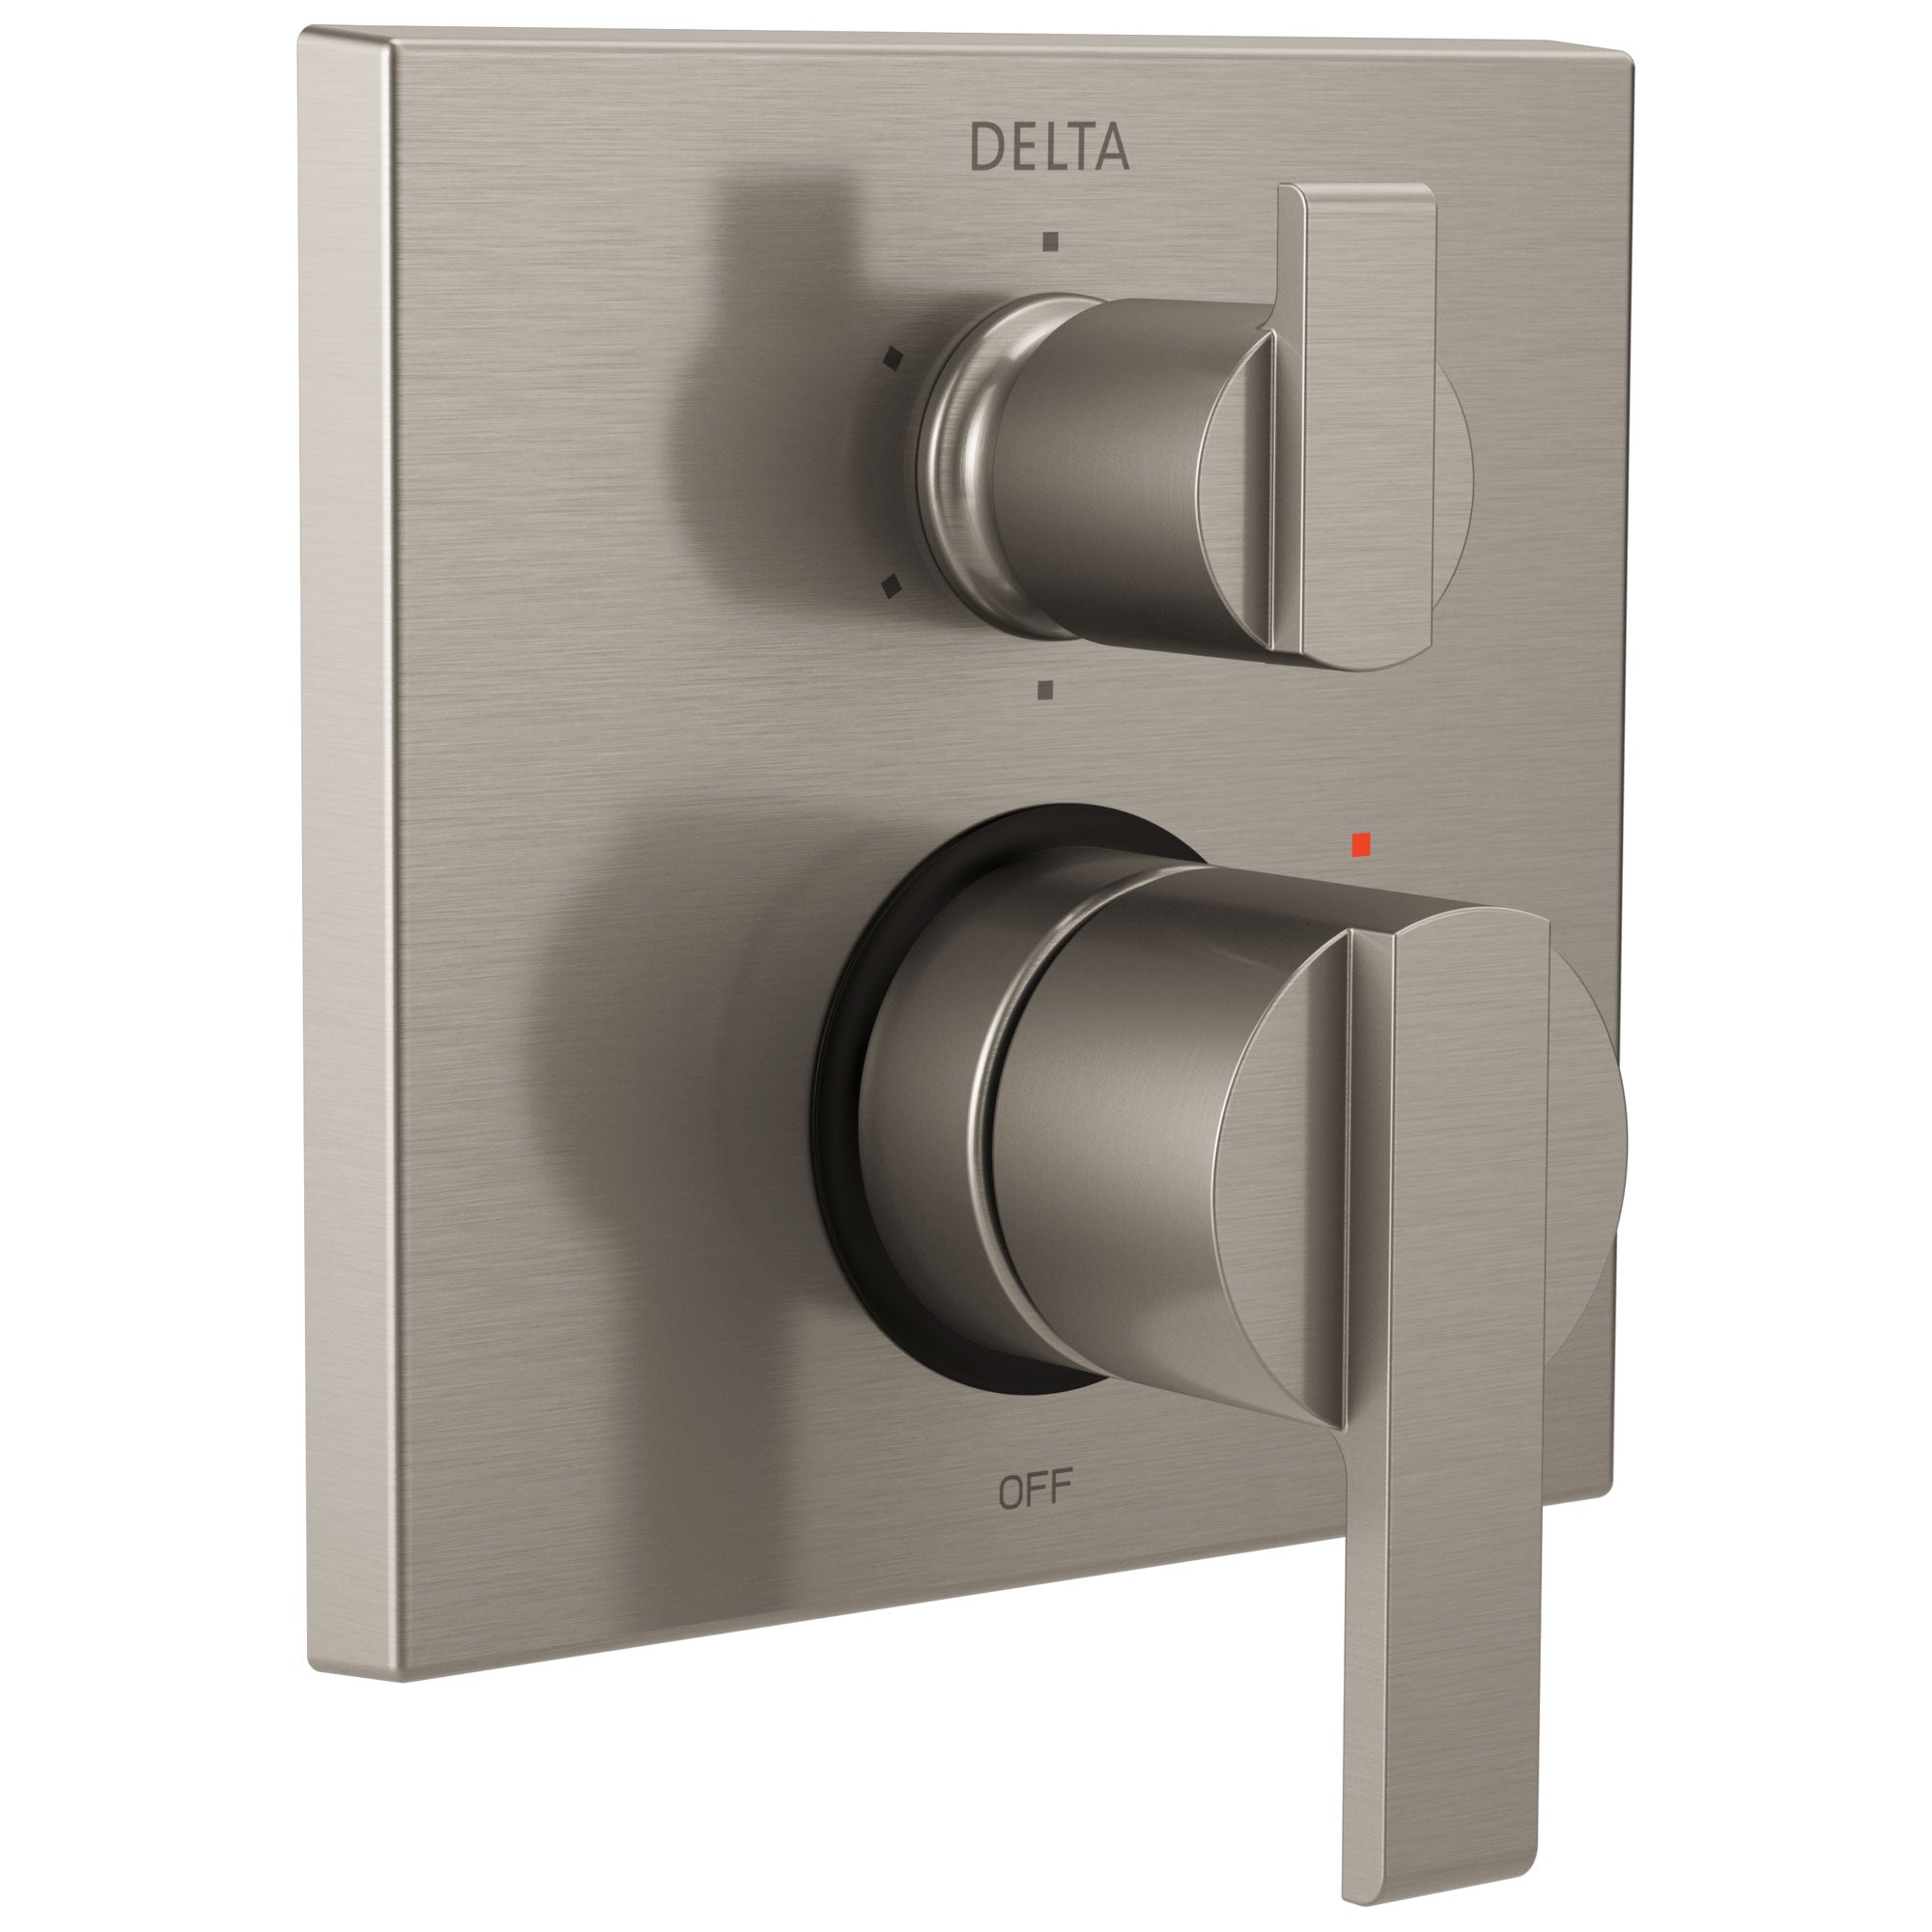 Delta Ara Collection Stainless Steel Finish Modern Shower Faucet Control Handle with 6-Setting Integrated Diverter Trim (Requires Valve) DT24967SS